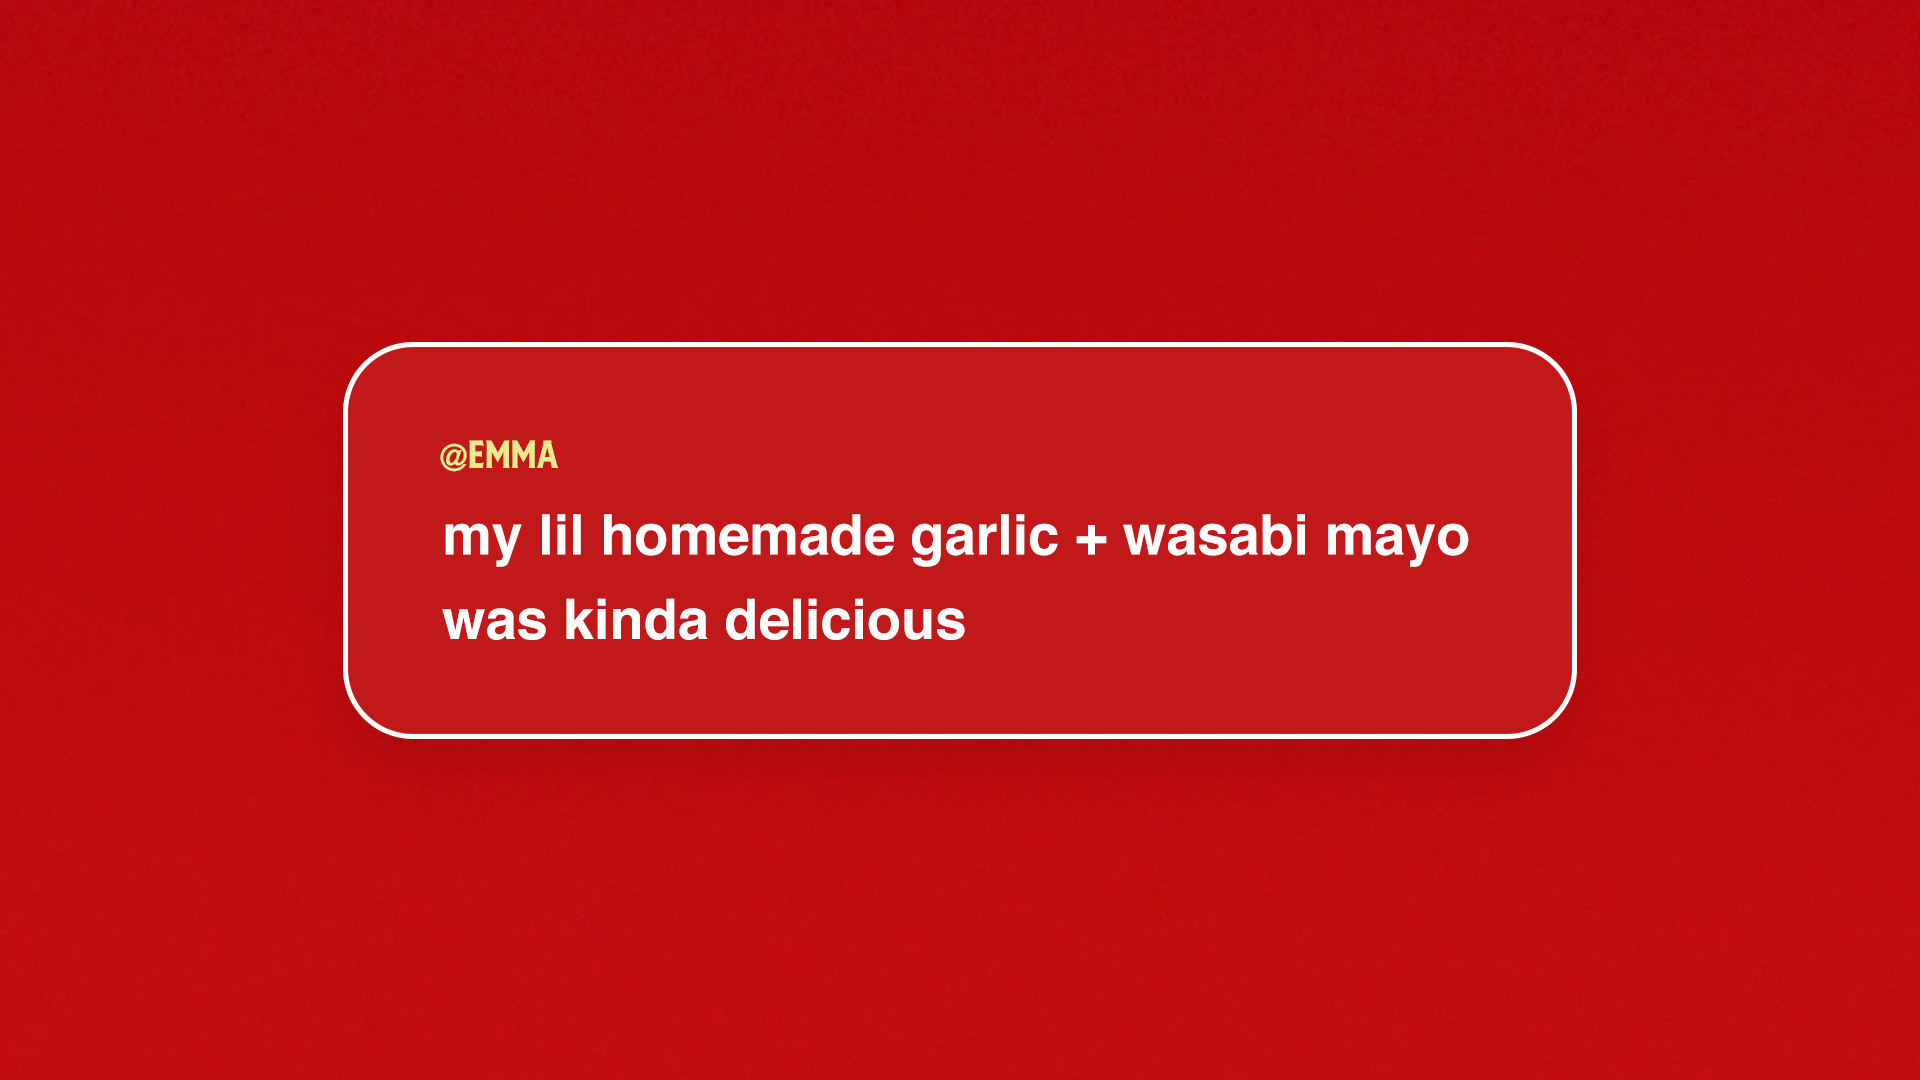 Text that says &quot;My lil homemade garlic + wasabi mayo was kinda delicious&quot;